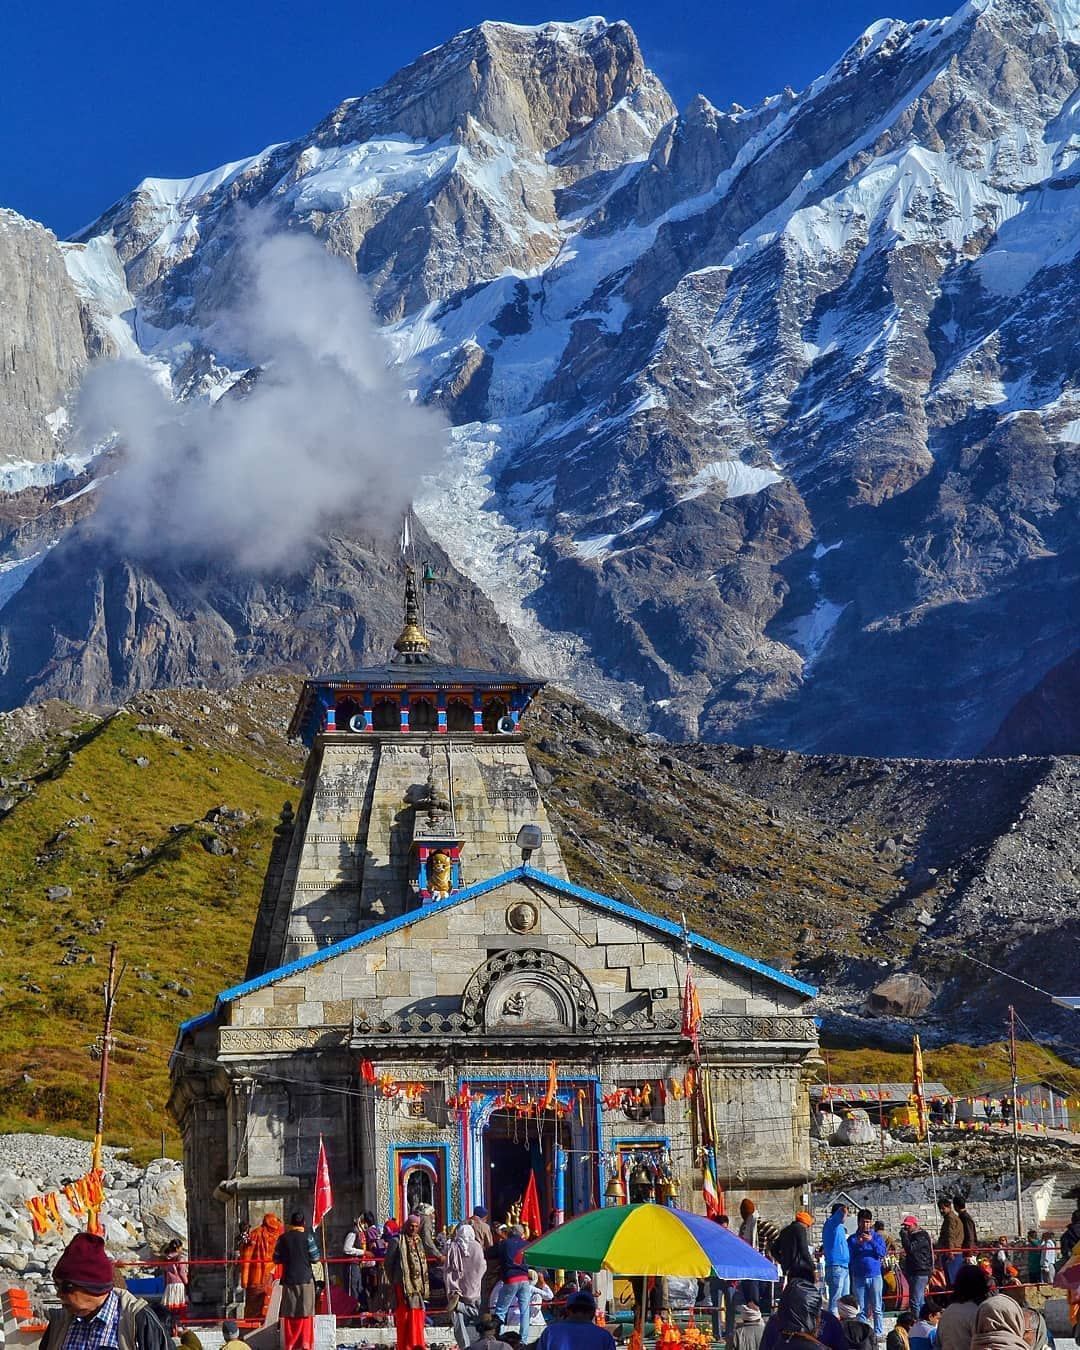 In the picture, Kedarnath Temple and the main peak in